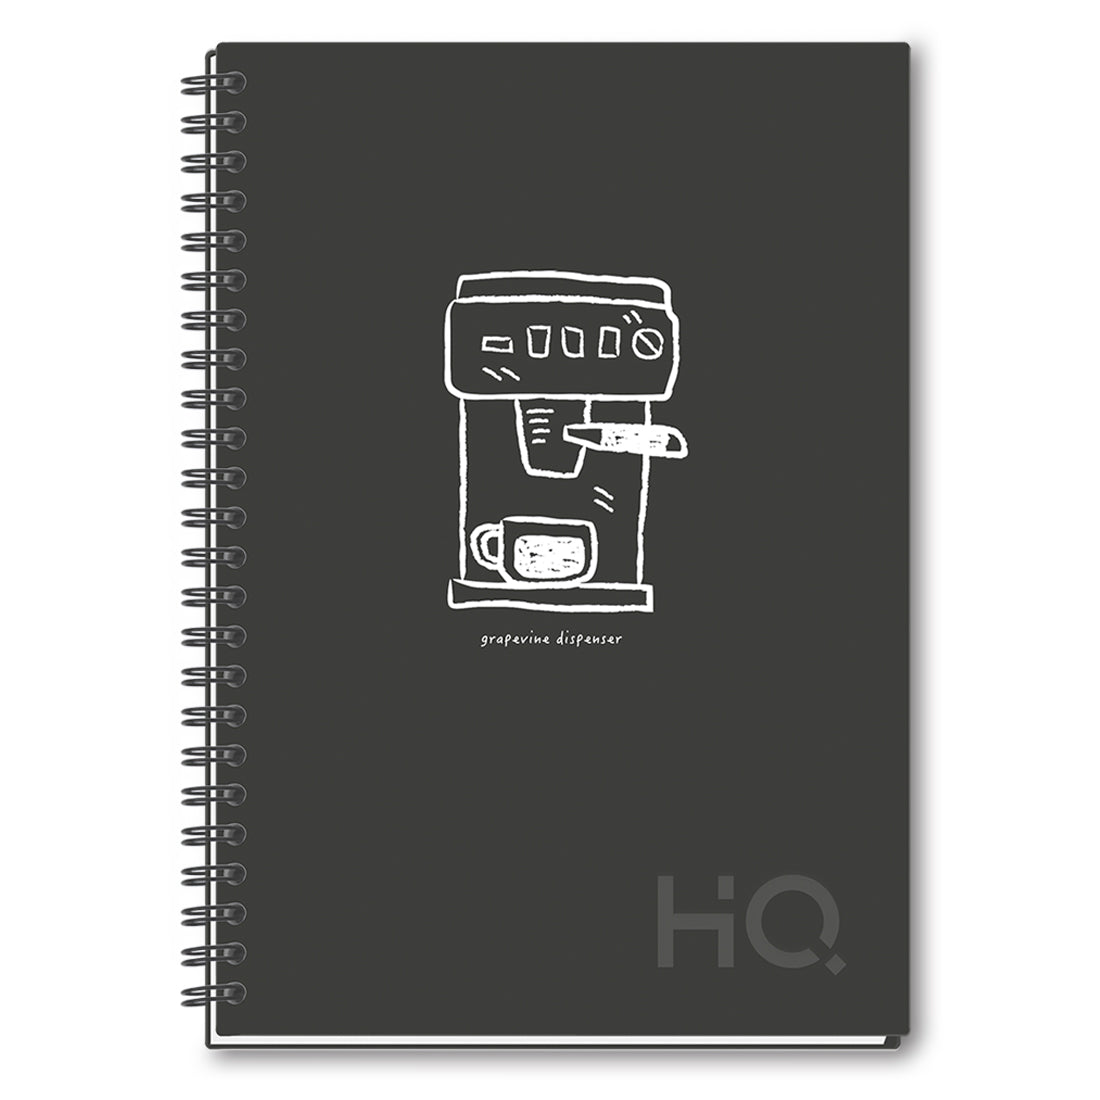 Navneet HQ | Hard Cover Notebook - Corporate Edge (Black) for Office and Professional Use | Wiro Bound and UV printing | Single Line | A5 Size - 21 cm x 14.8 cm | 192 Pages